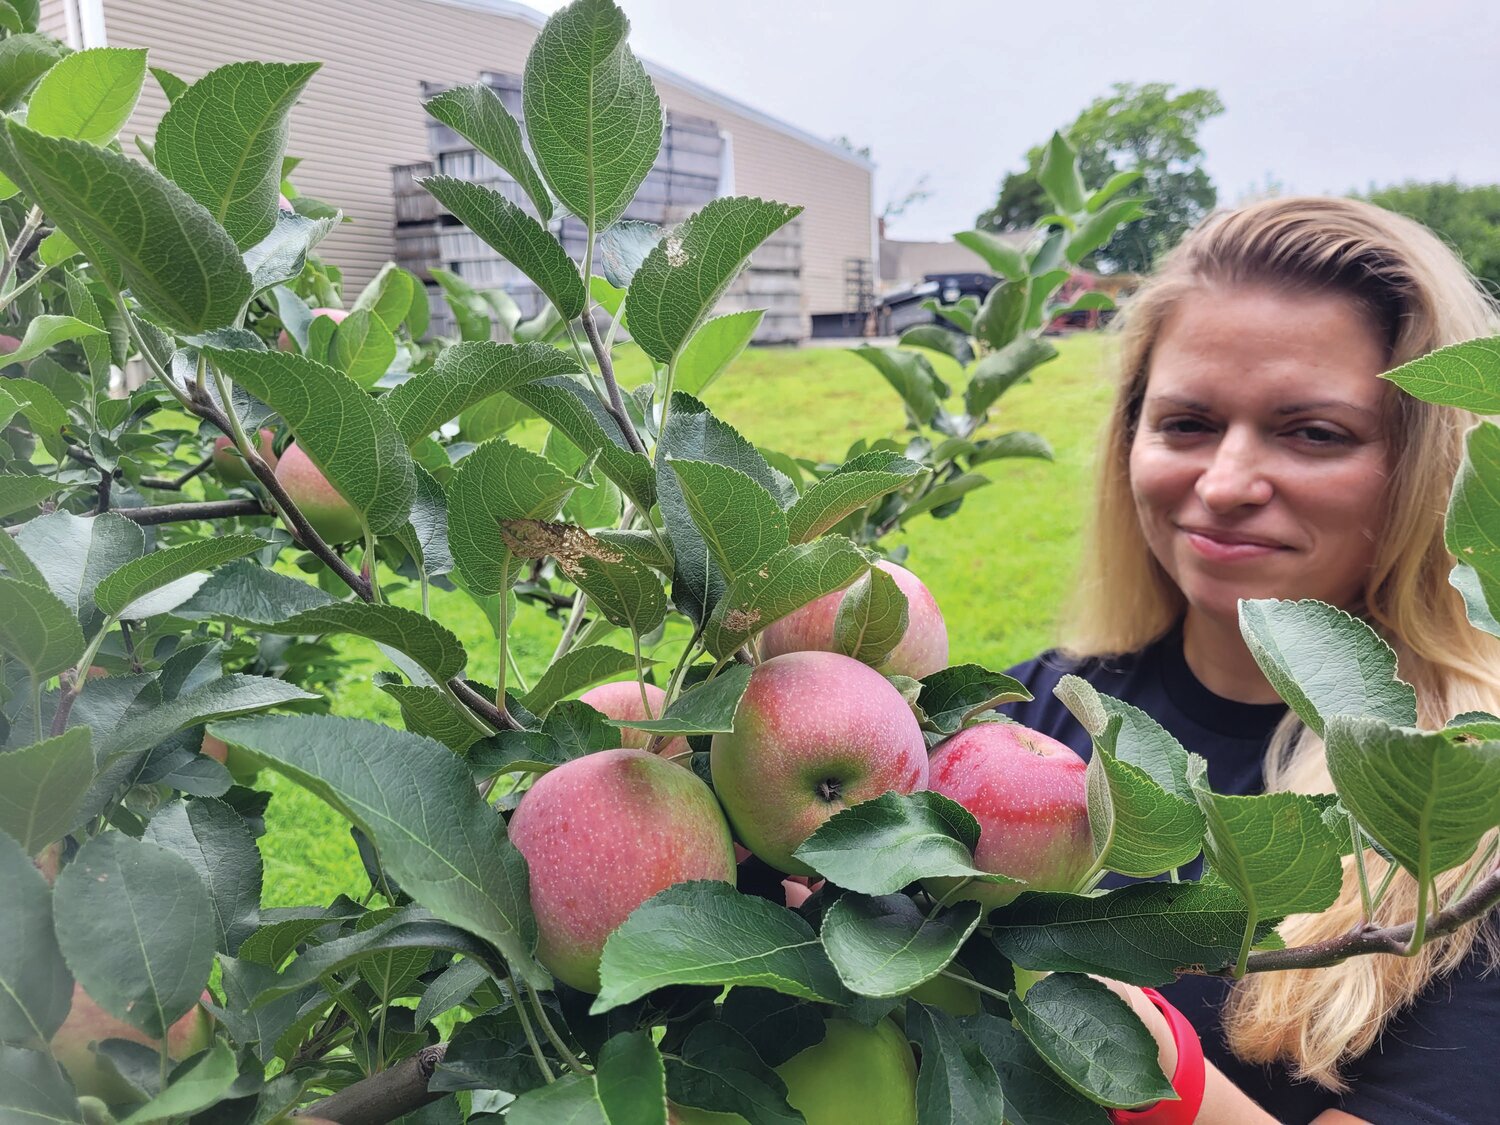 NEW FIELD HANDS: Appleland co-owner Ashley Shields checks the progress of some fresh produce growing on her family’s trees in Smithfield. The Shields family purchased the orchard and farm stand from former owners, Mary Lou D’Andrea and her husband Lou.